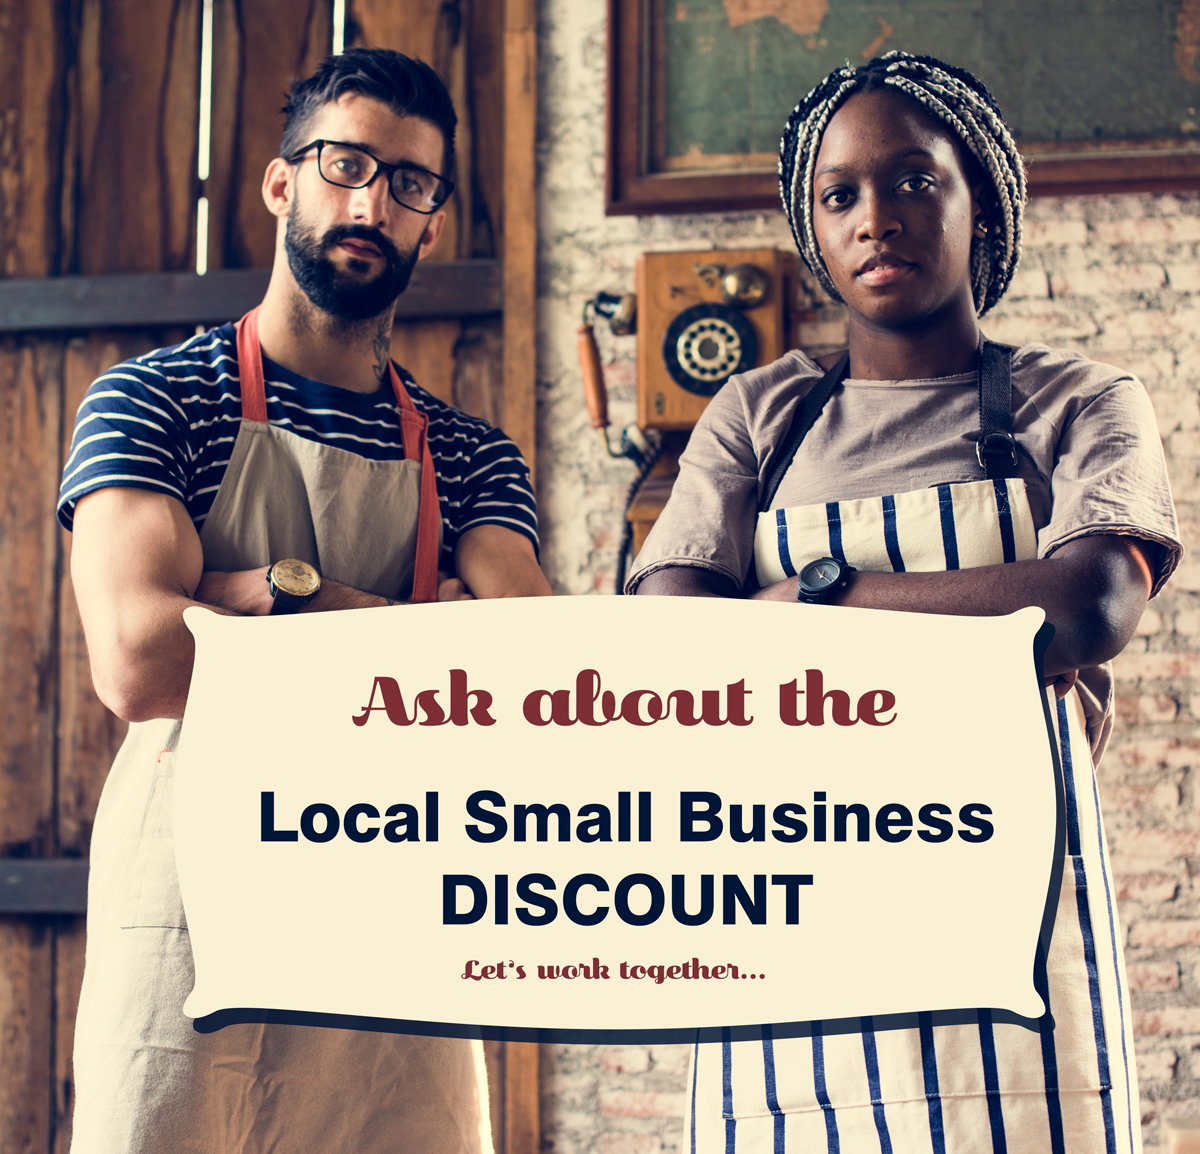 Small Business Discount